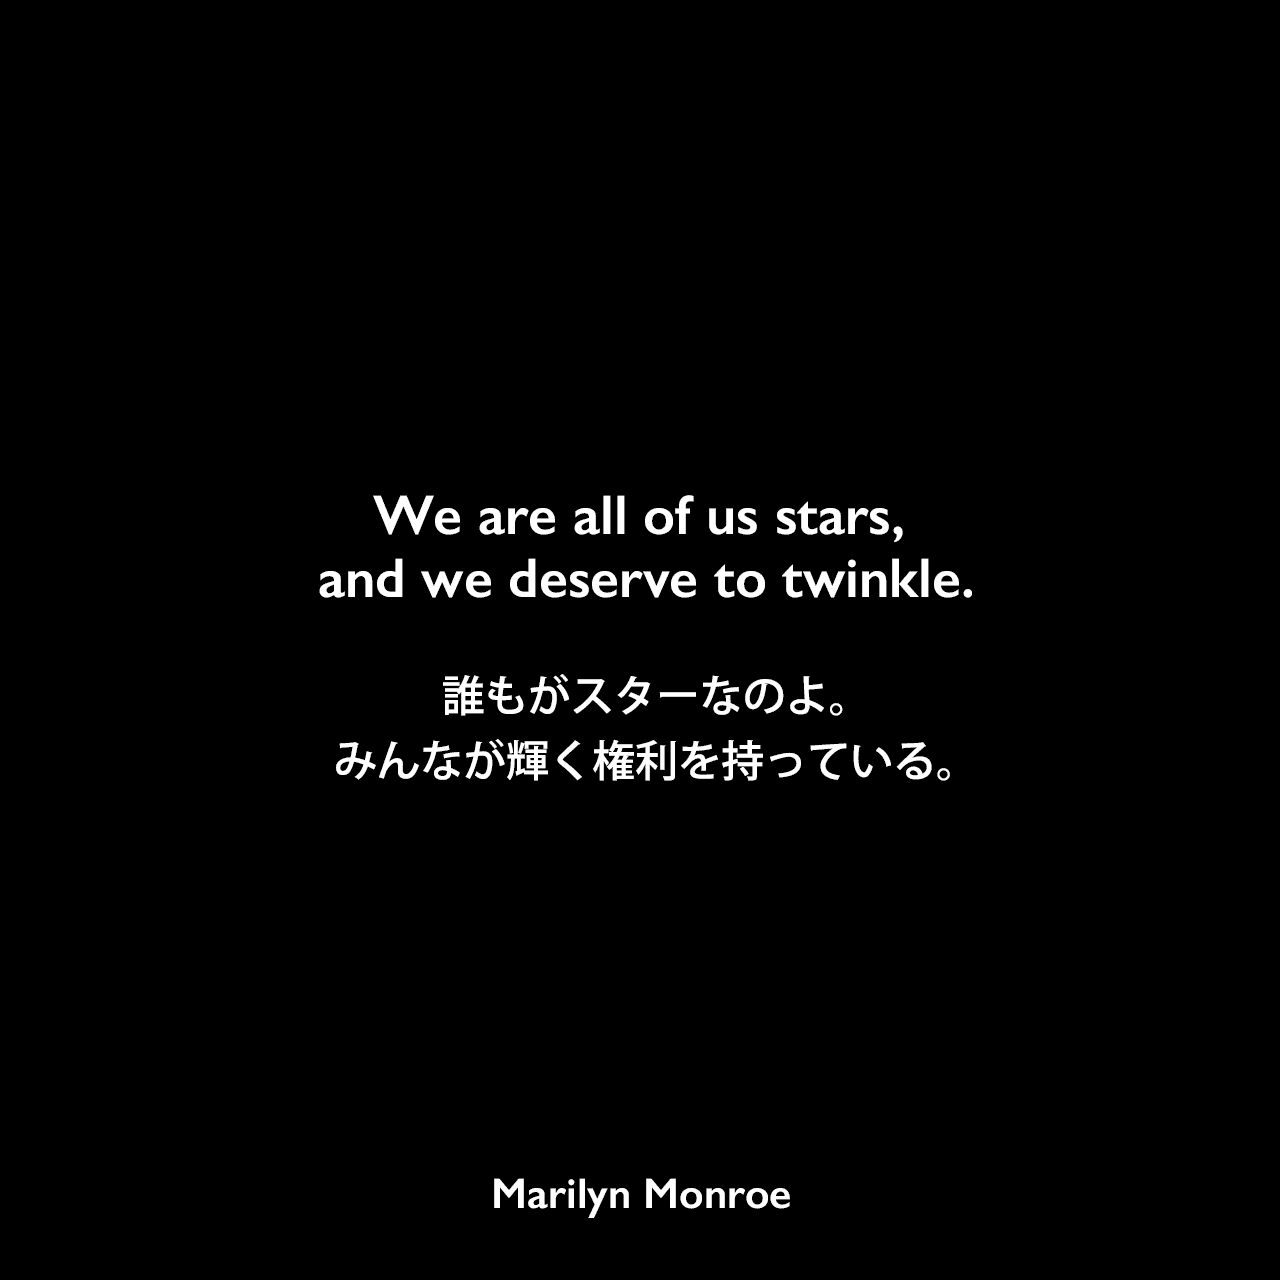 We are all of us stars, and we deserve to twinkle.誰もがスターなのよ。みんなが輝く権利を持っている。